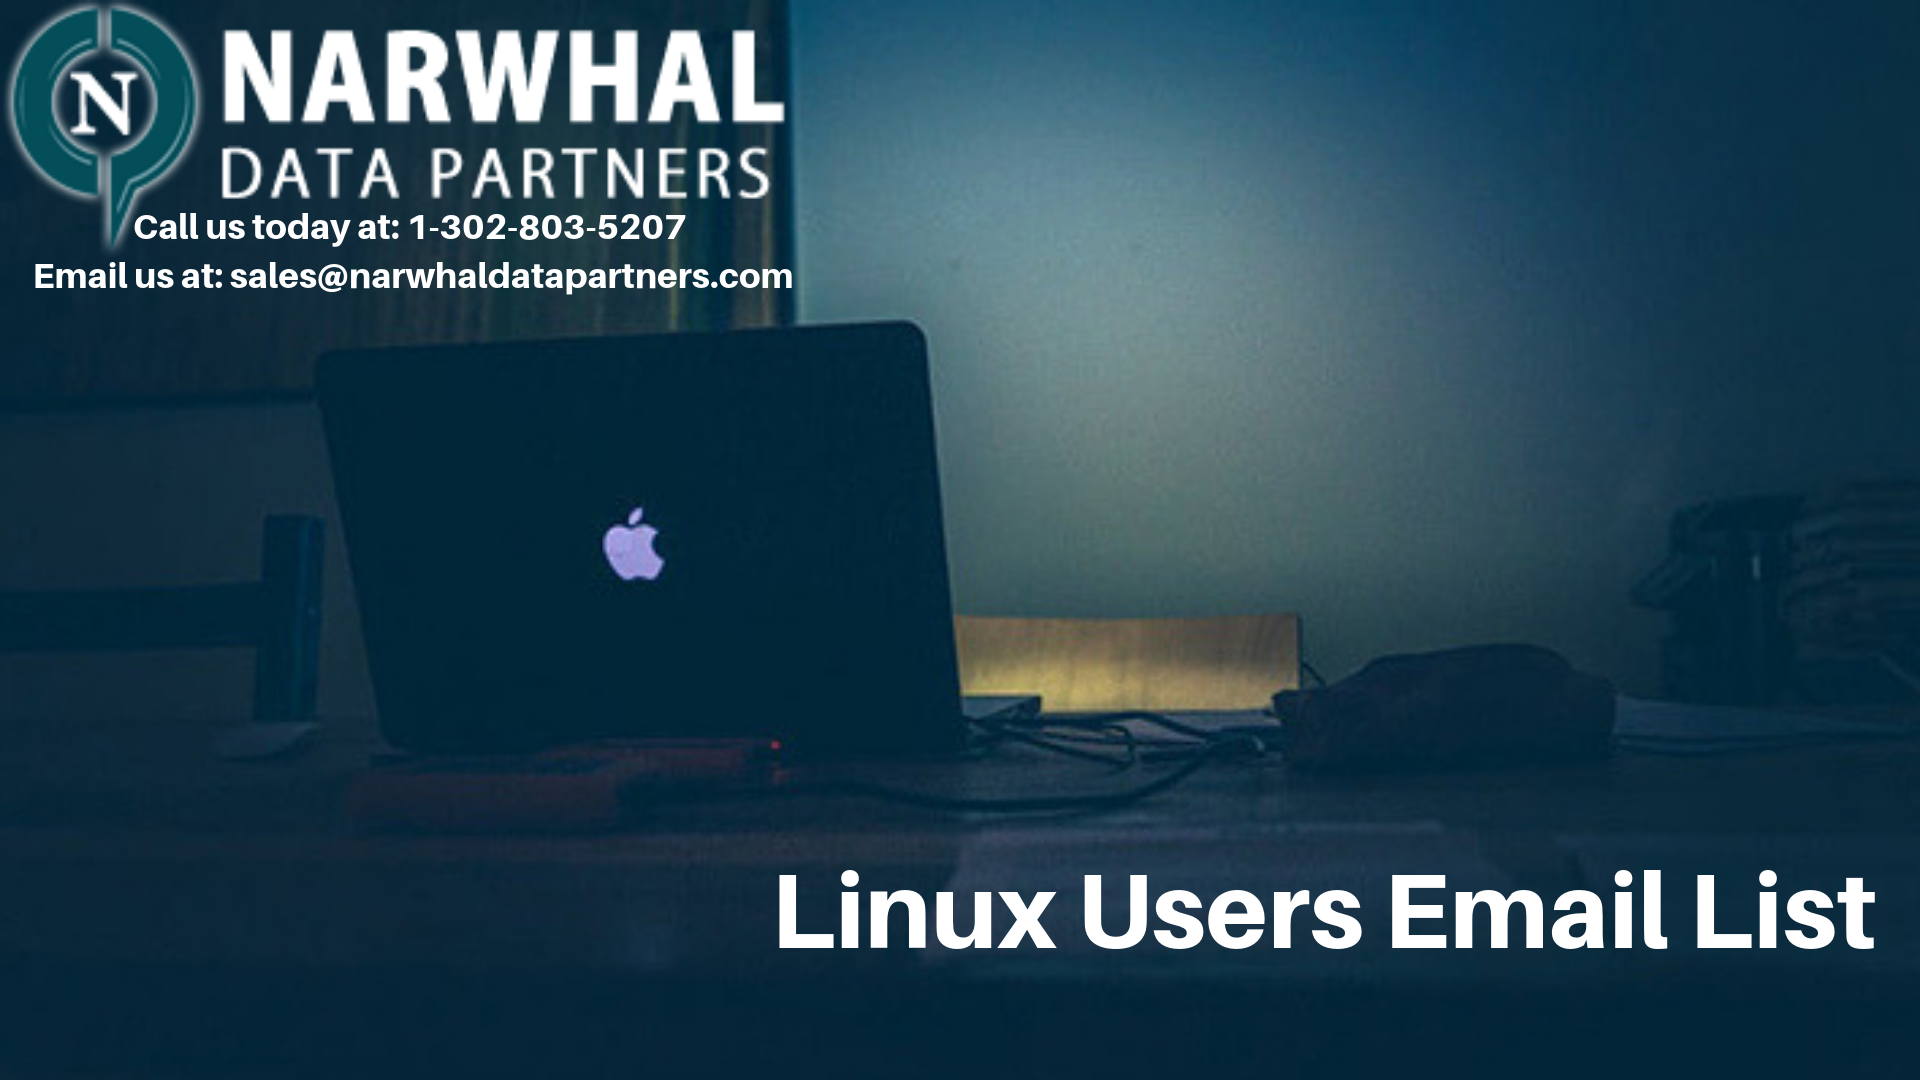 http://narwhaldatapartners.com/linux-users-email-list.html